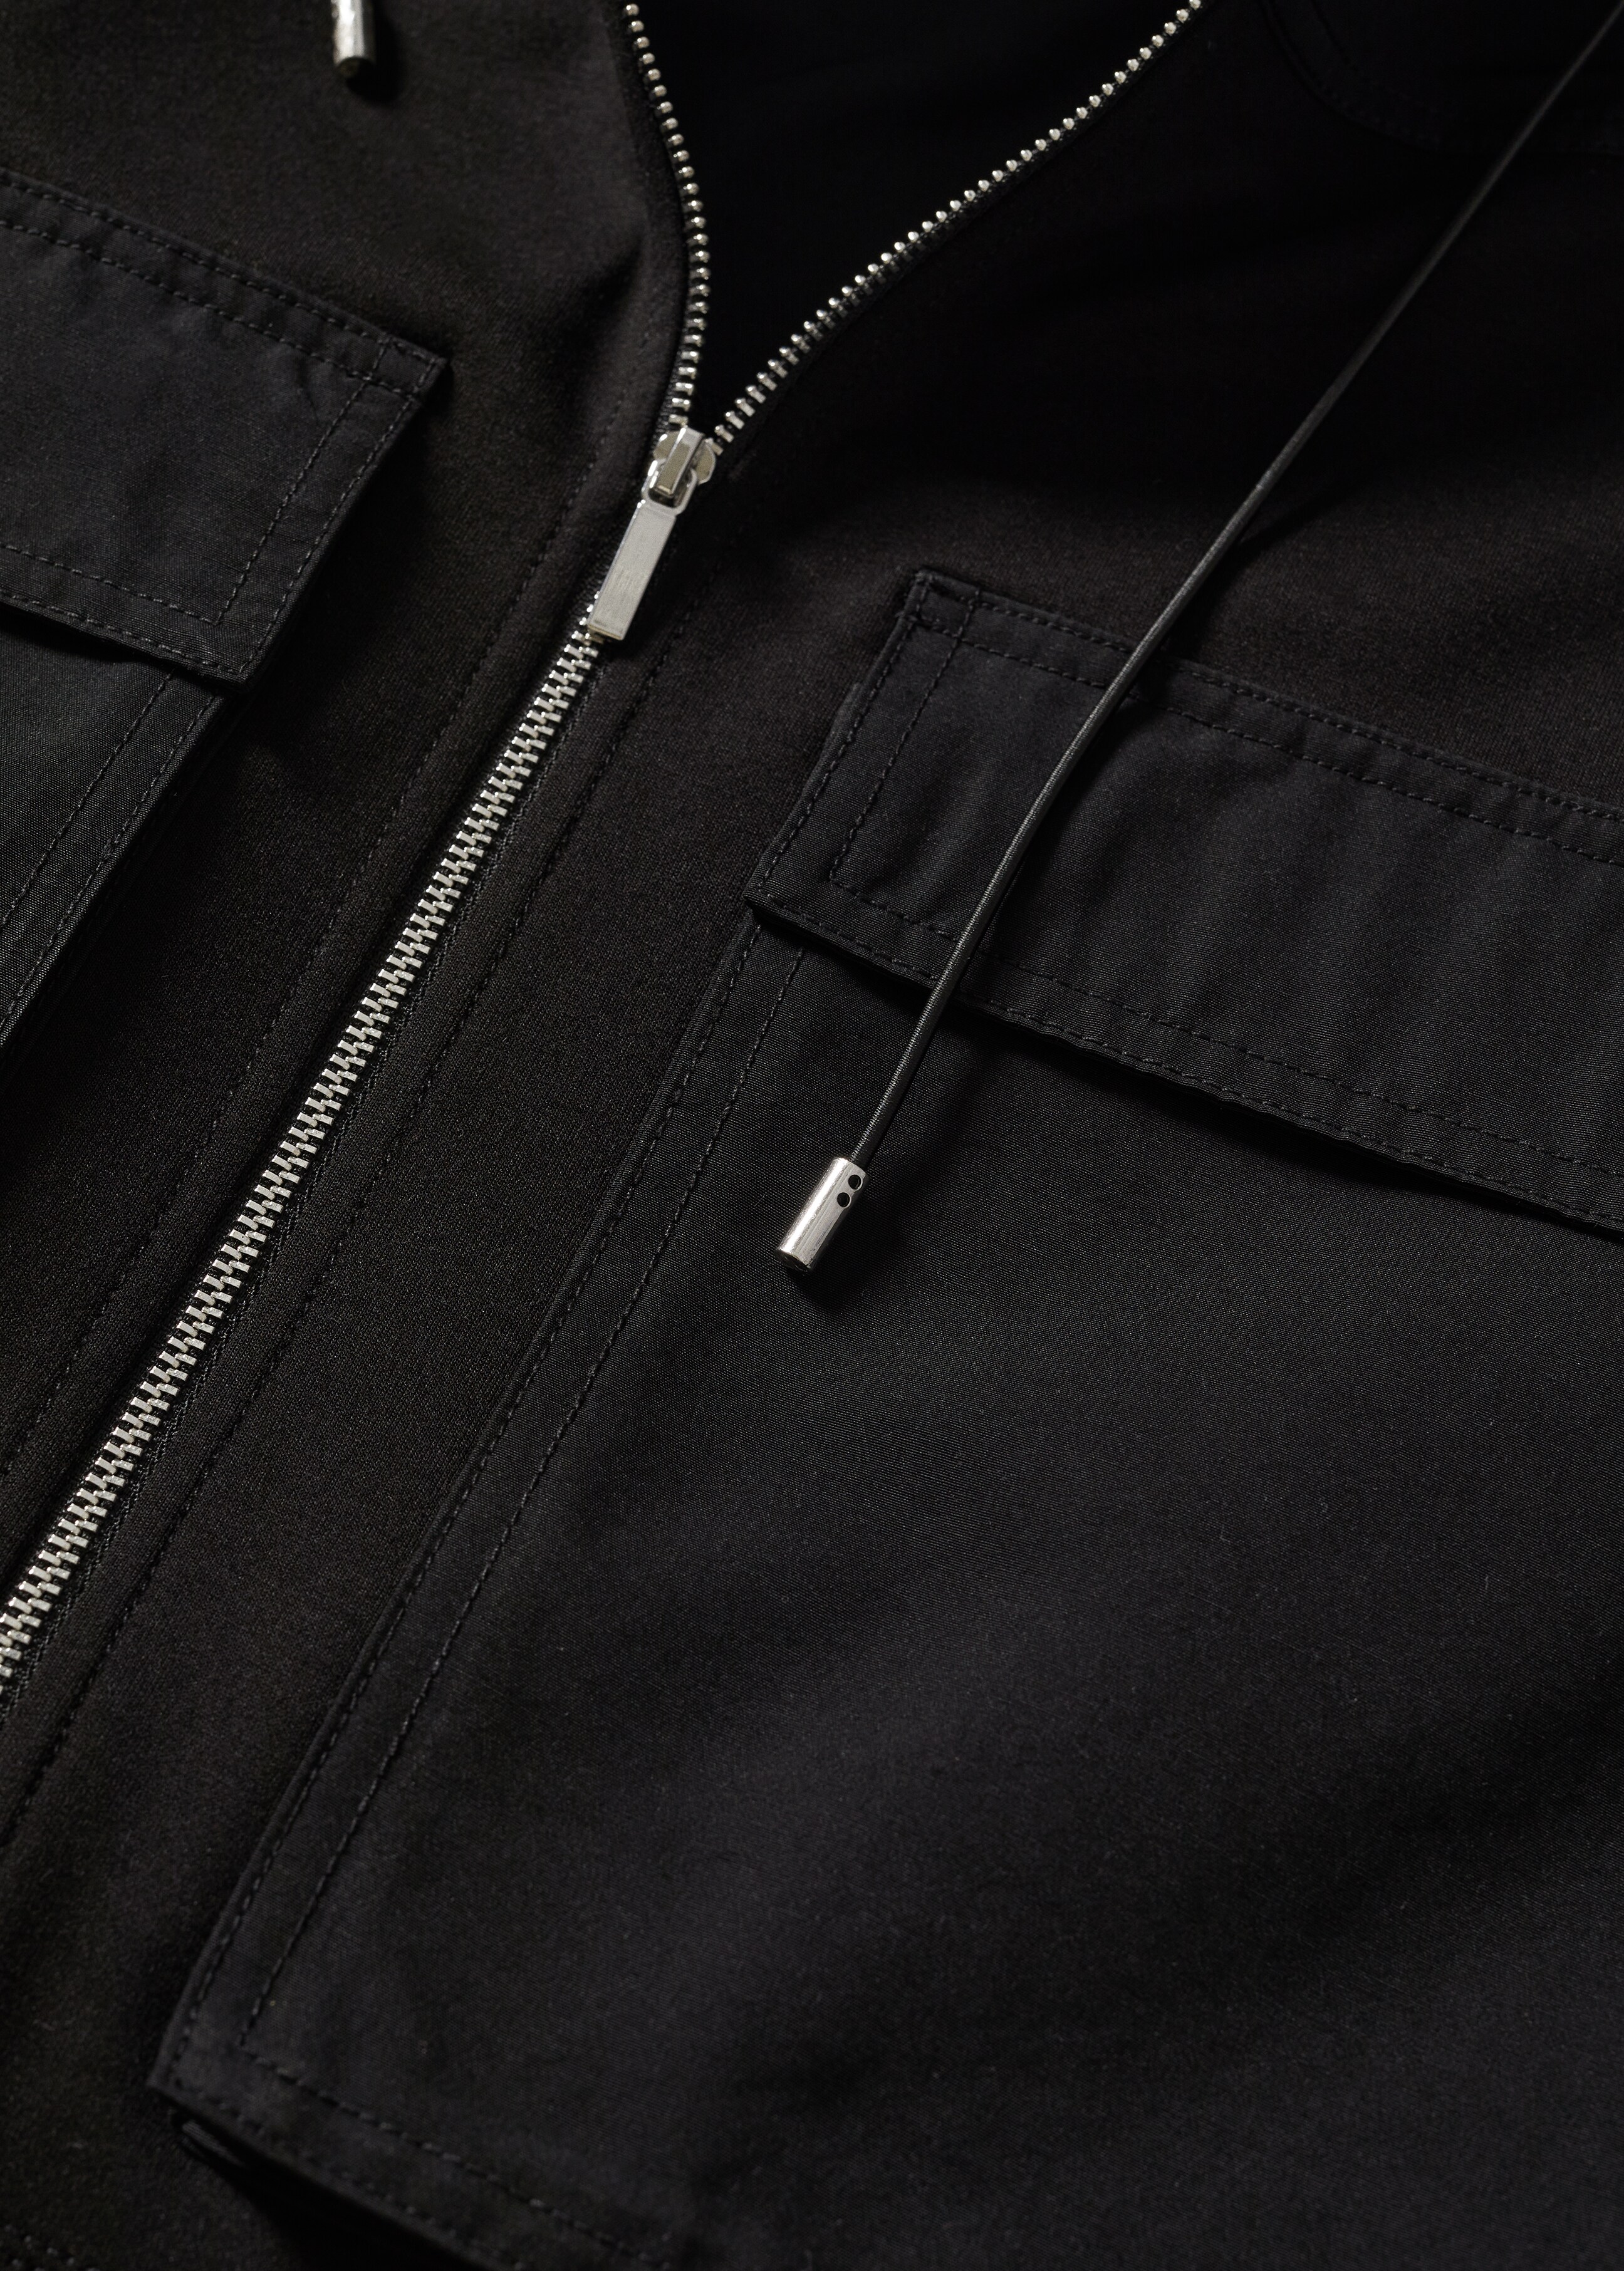 Oversized sweatshirt with pockets - Details of the article 8